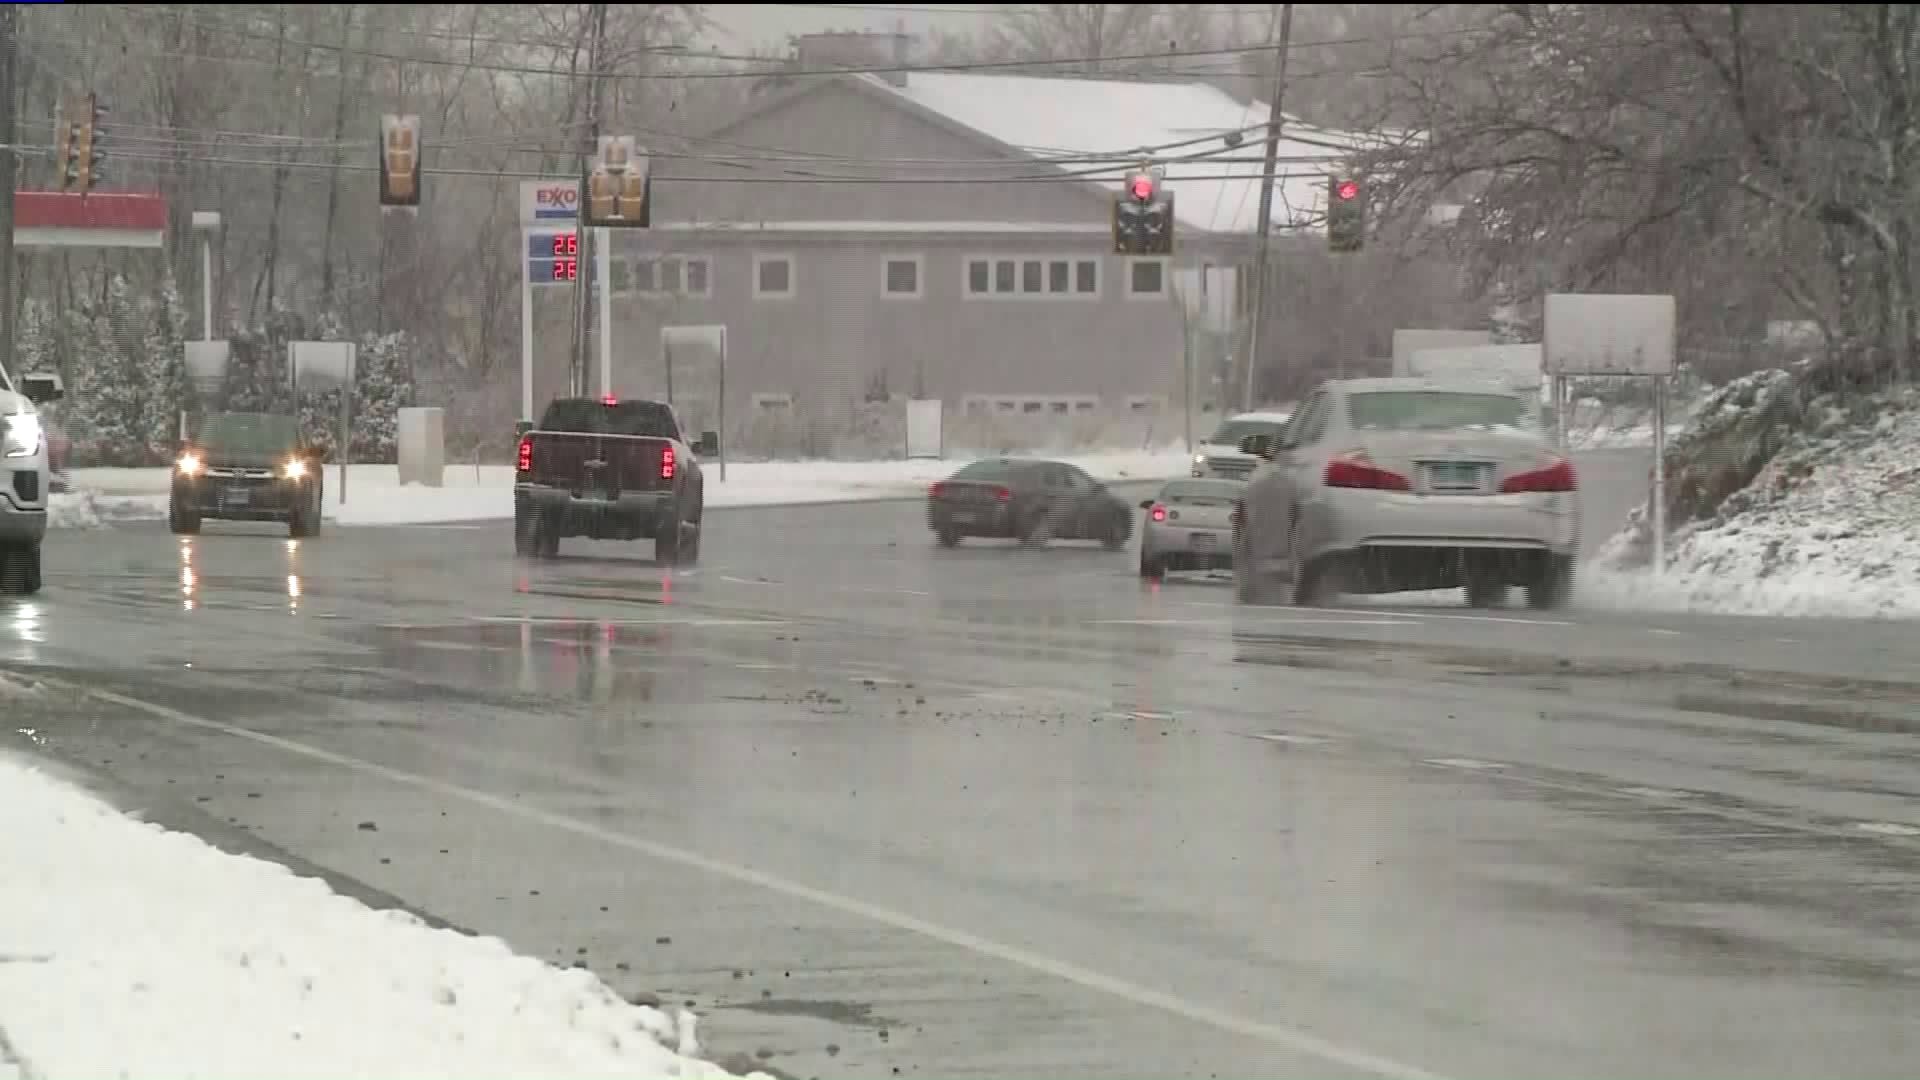 AAA has surge of calls from holiday weekend and winter storm